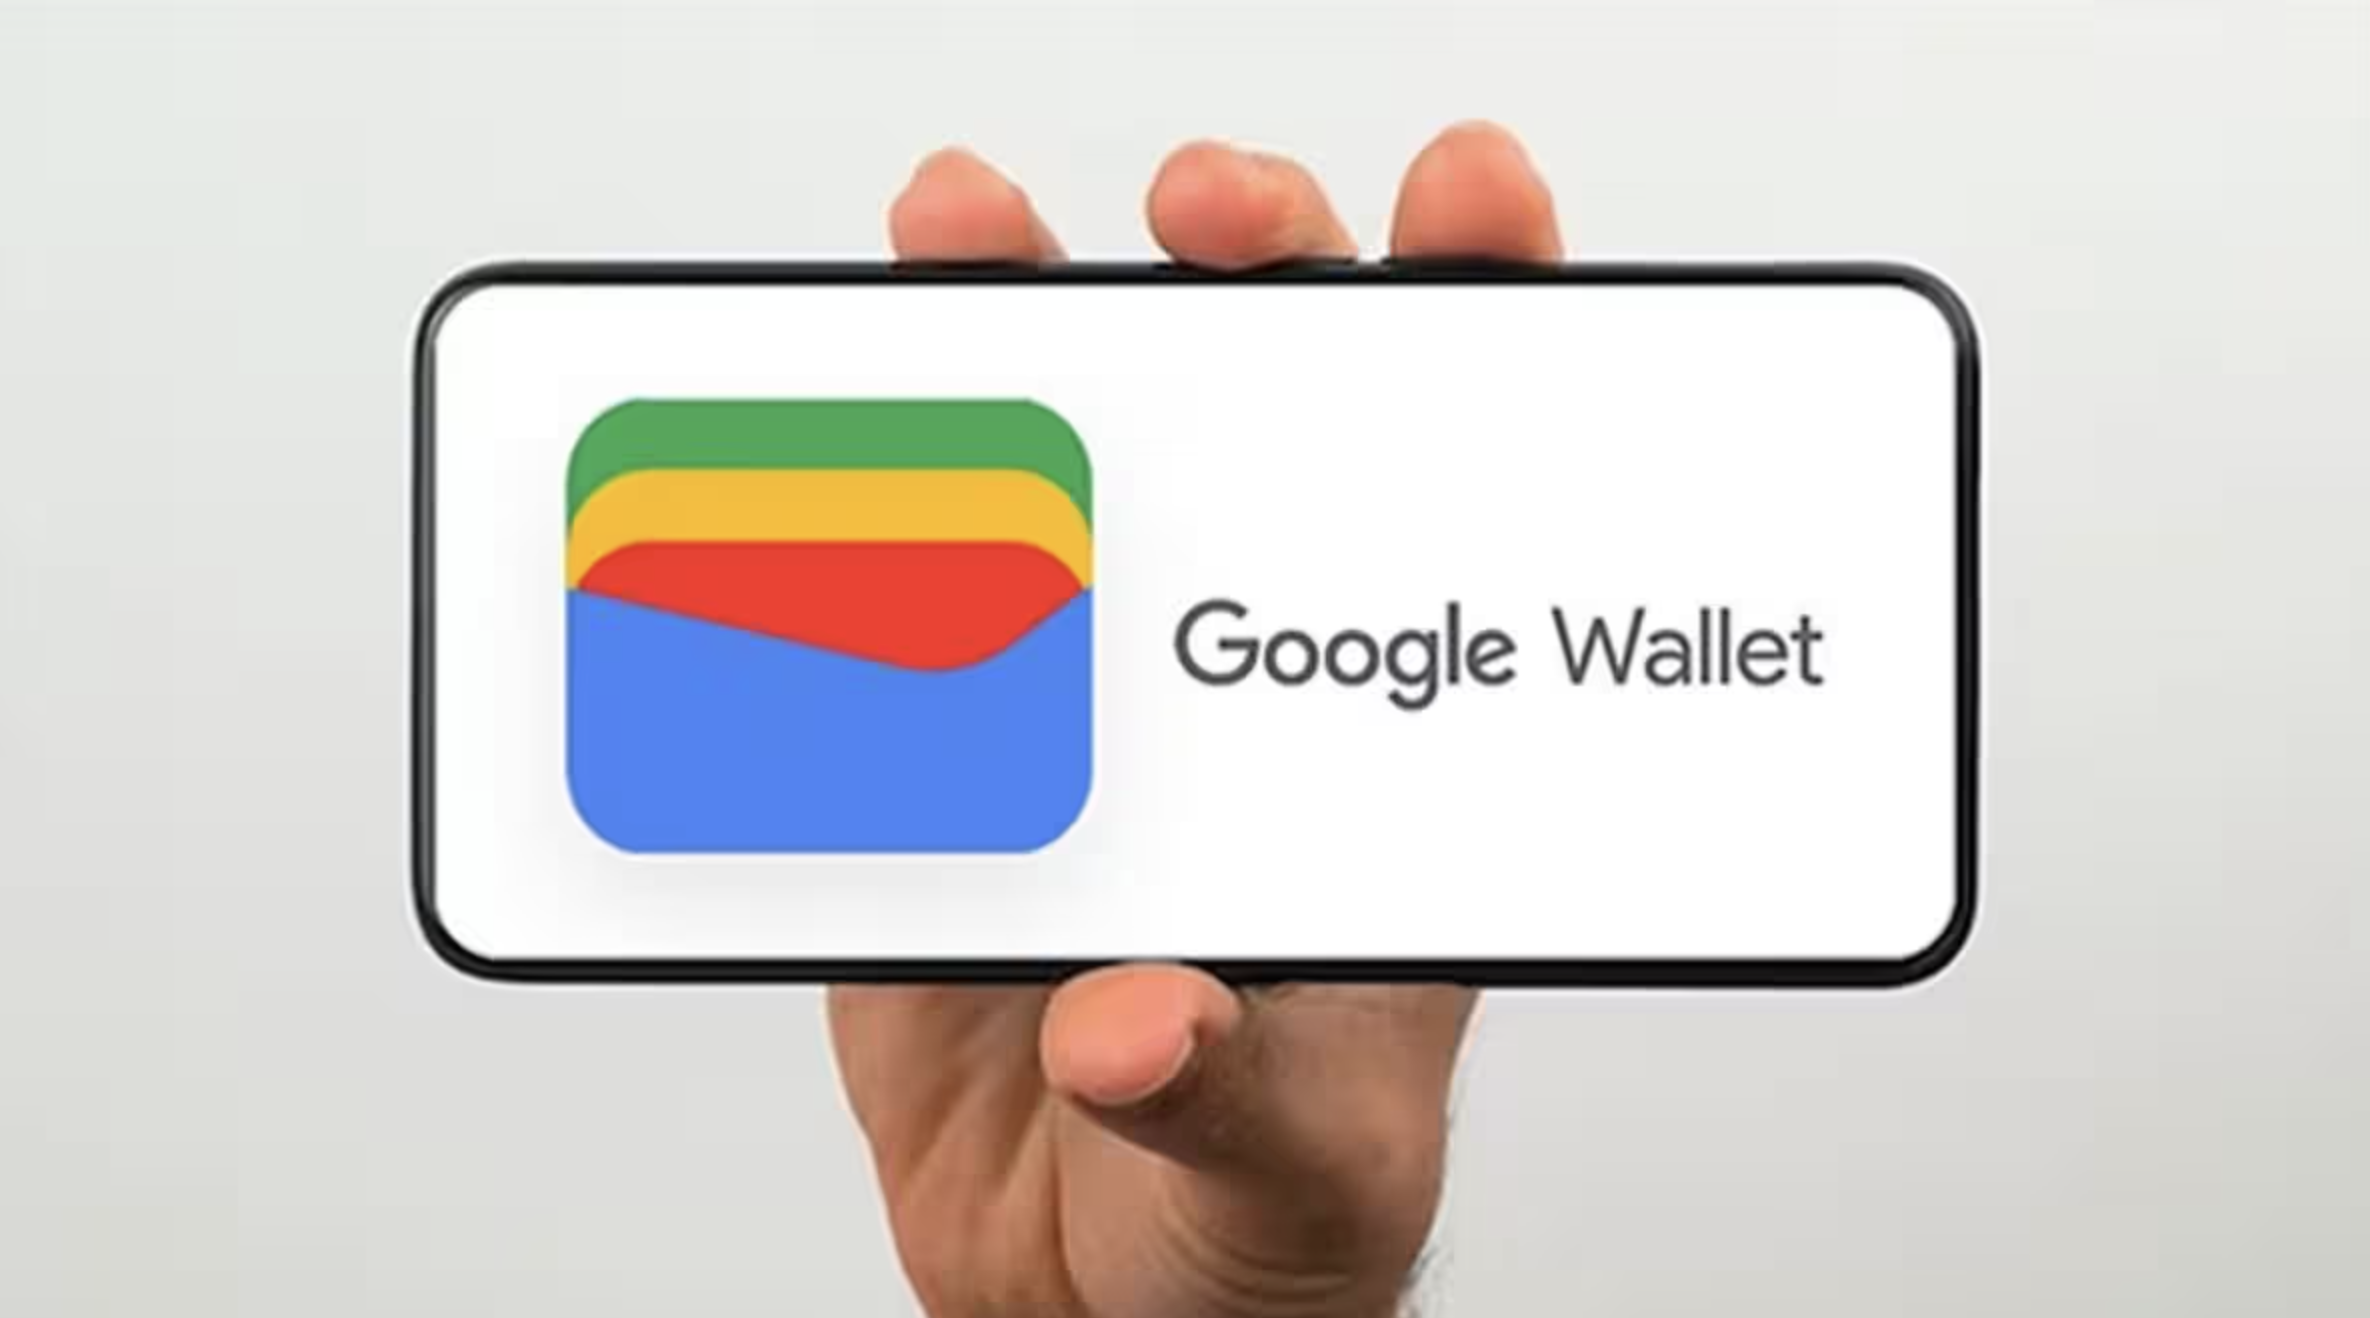 Google Wallet Is Live For Android Users: But Google Pay, Phone Pe Won't Work On It!